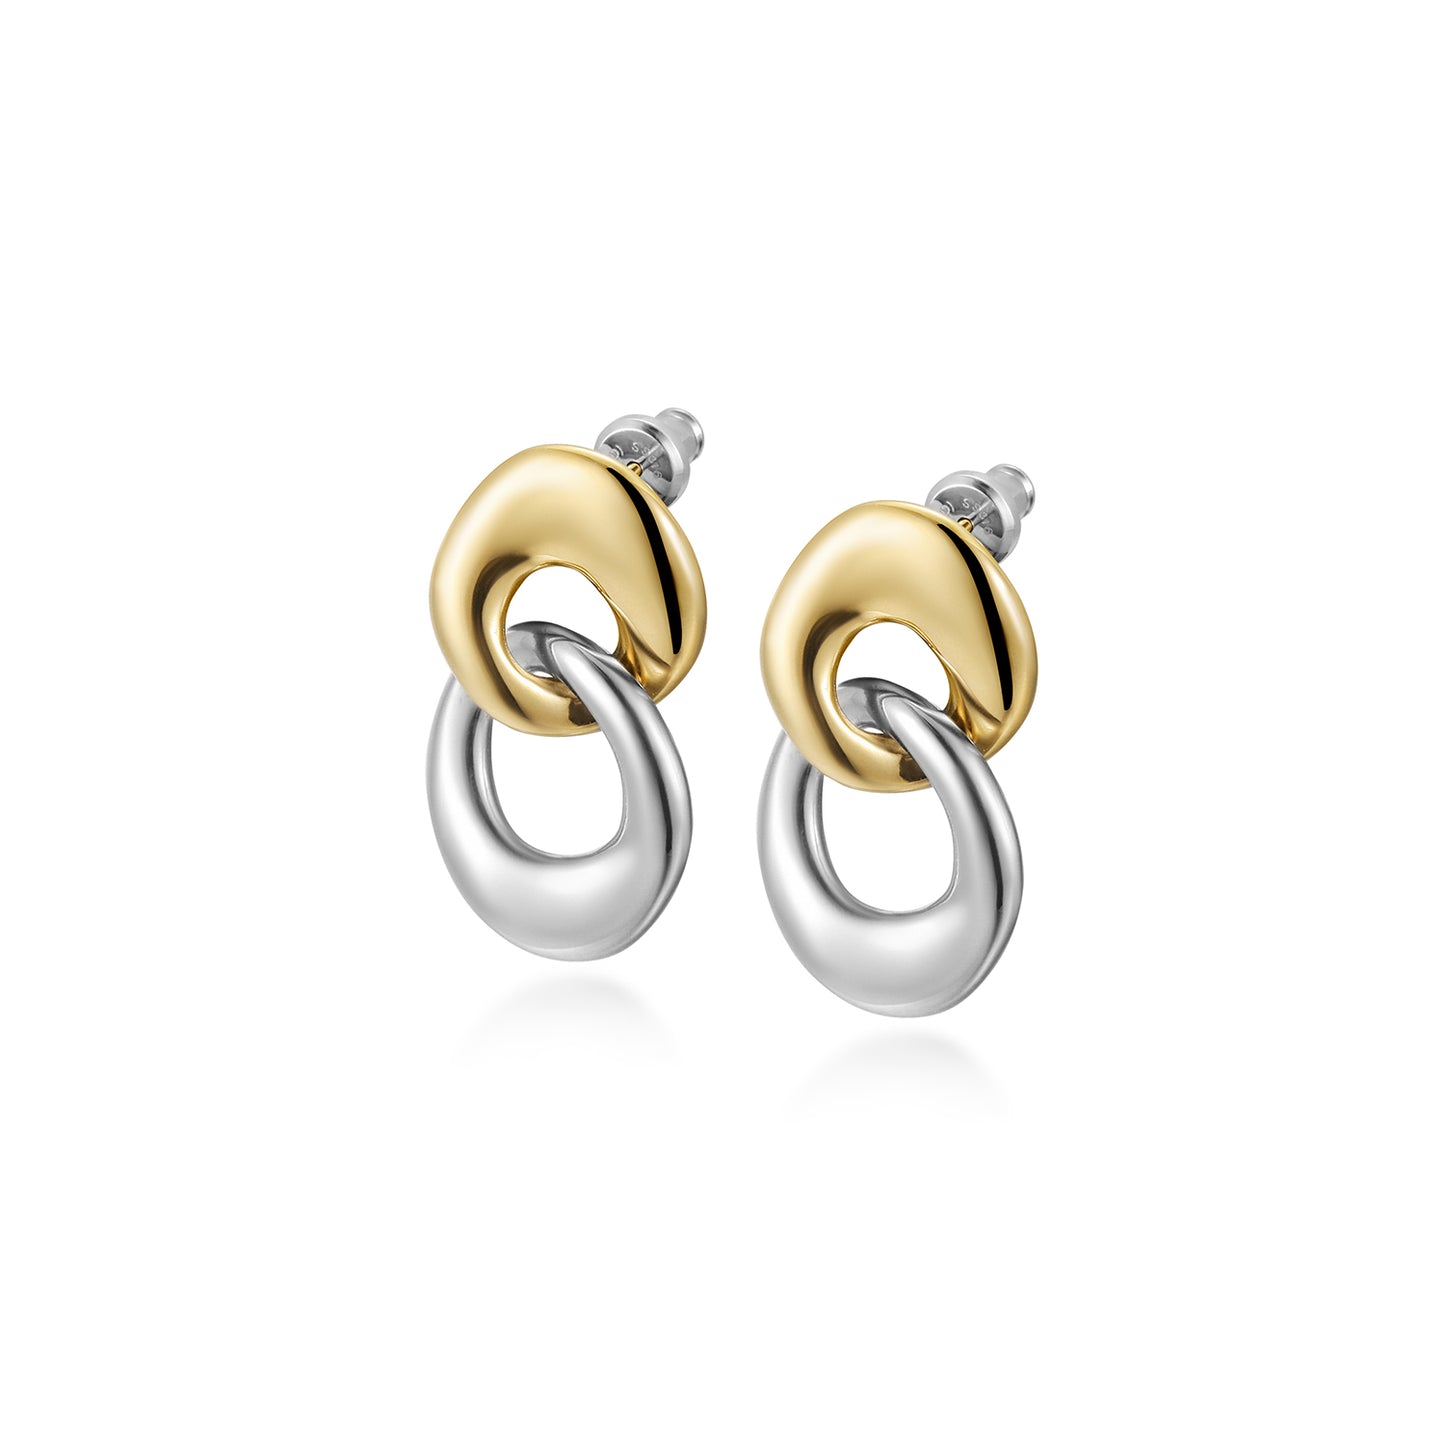 Knotted Silver Tone Screw Back Earrings